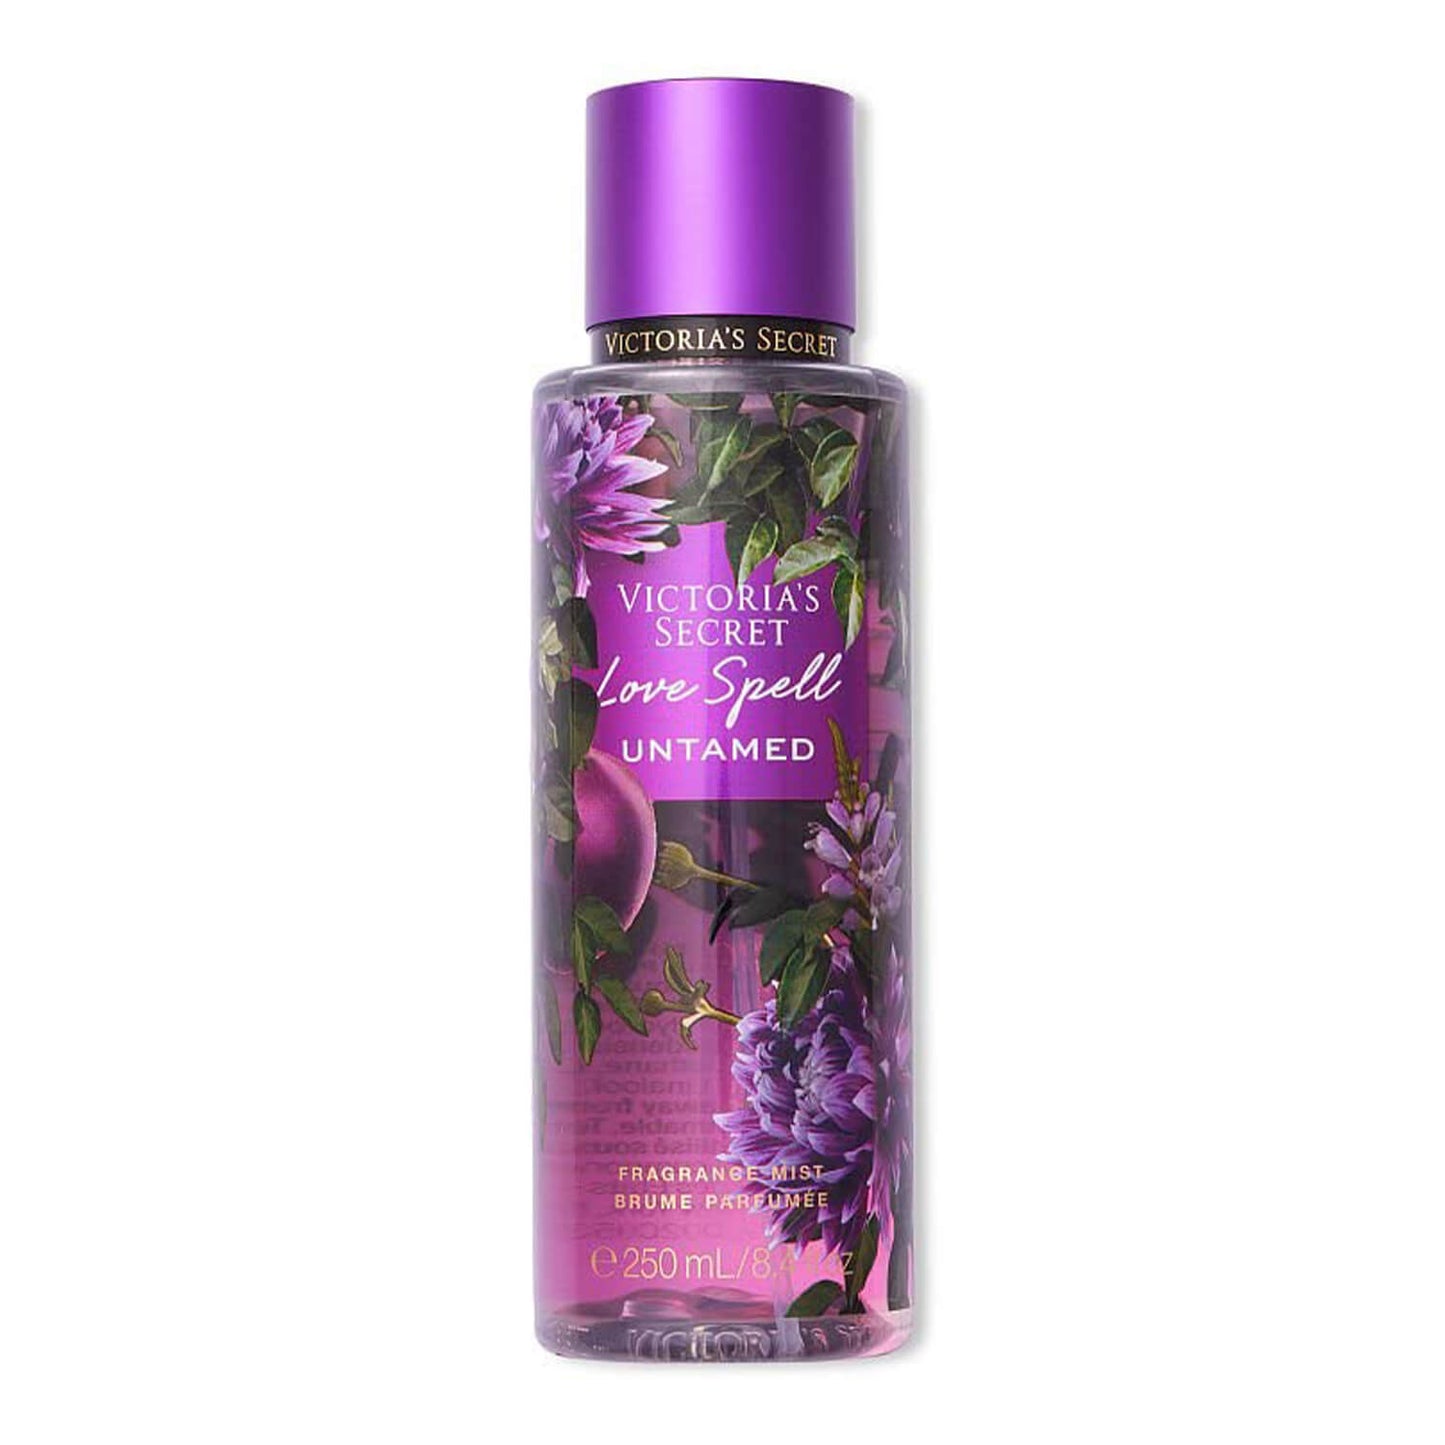 Shop Victoria's Secret mist in love spell untamed fragrance available at Heygirl.pk for delivery in Pakistan